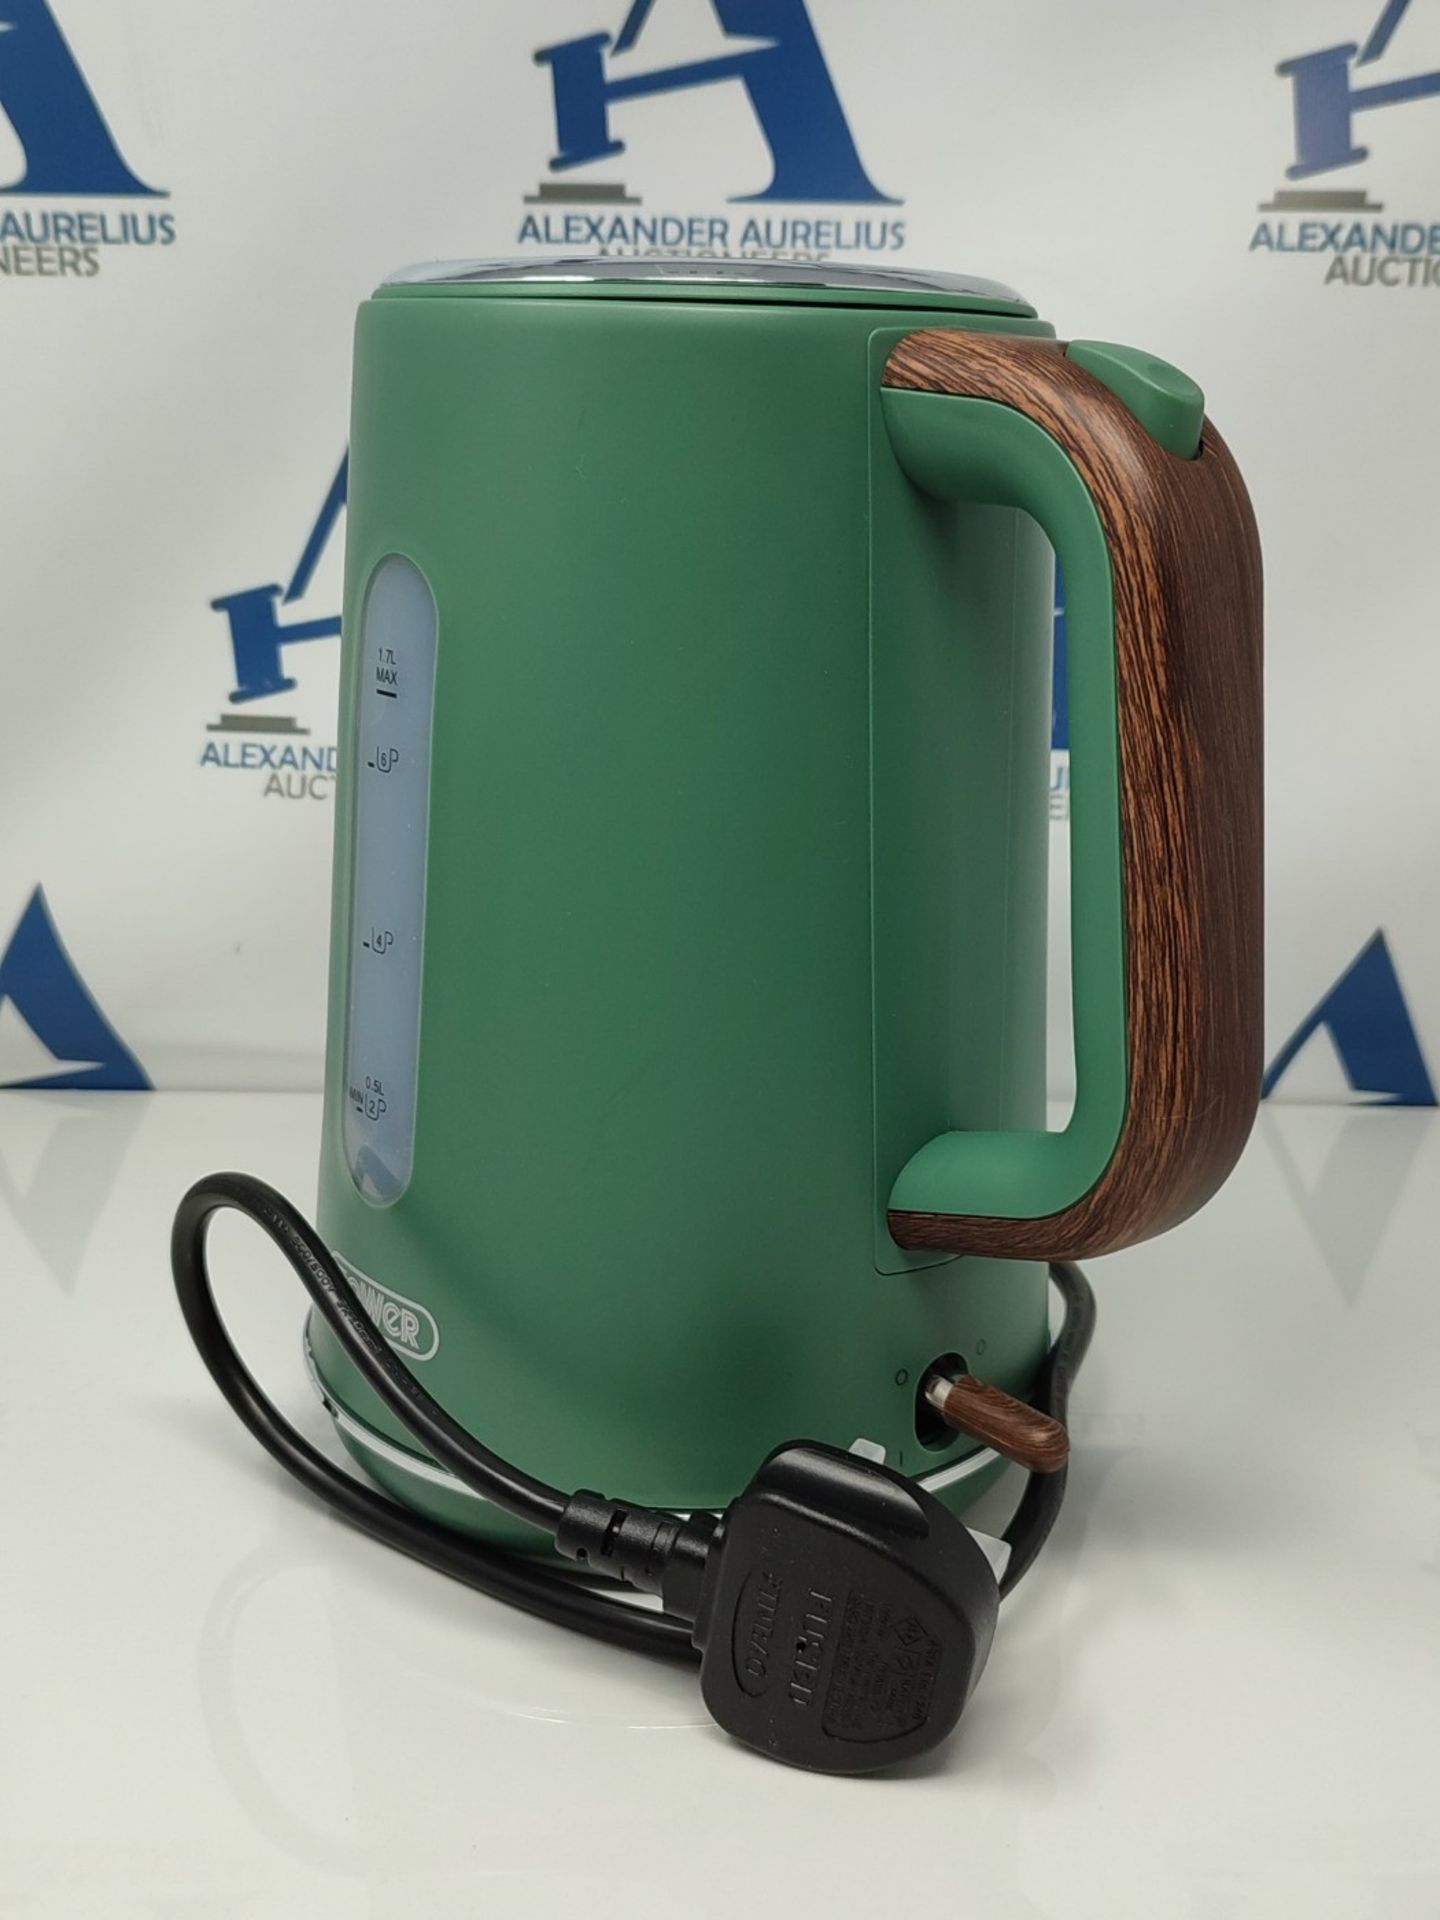 Tower T10037JDE Jug Kettle with Rapid Boil, 3000W, Jade Green, 1.7 L - Image 2 of 3